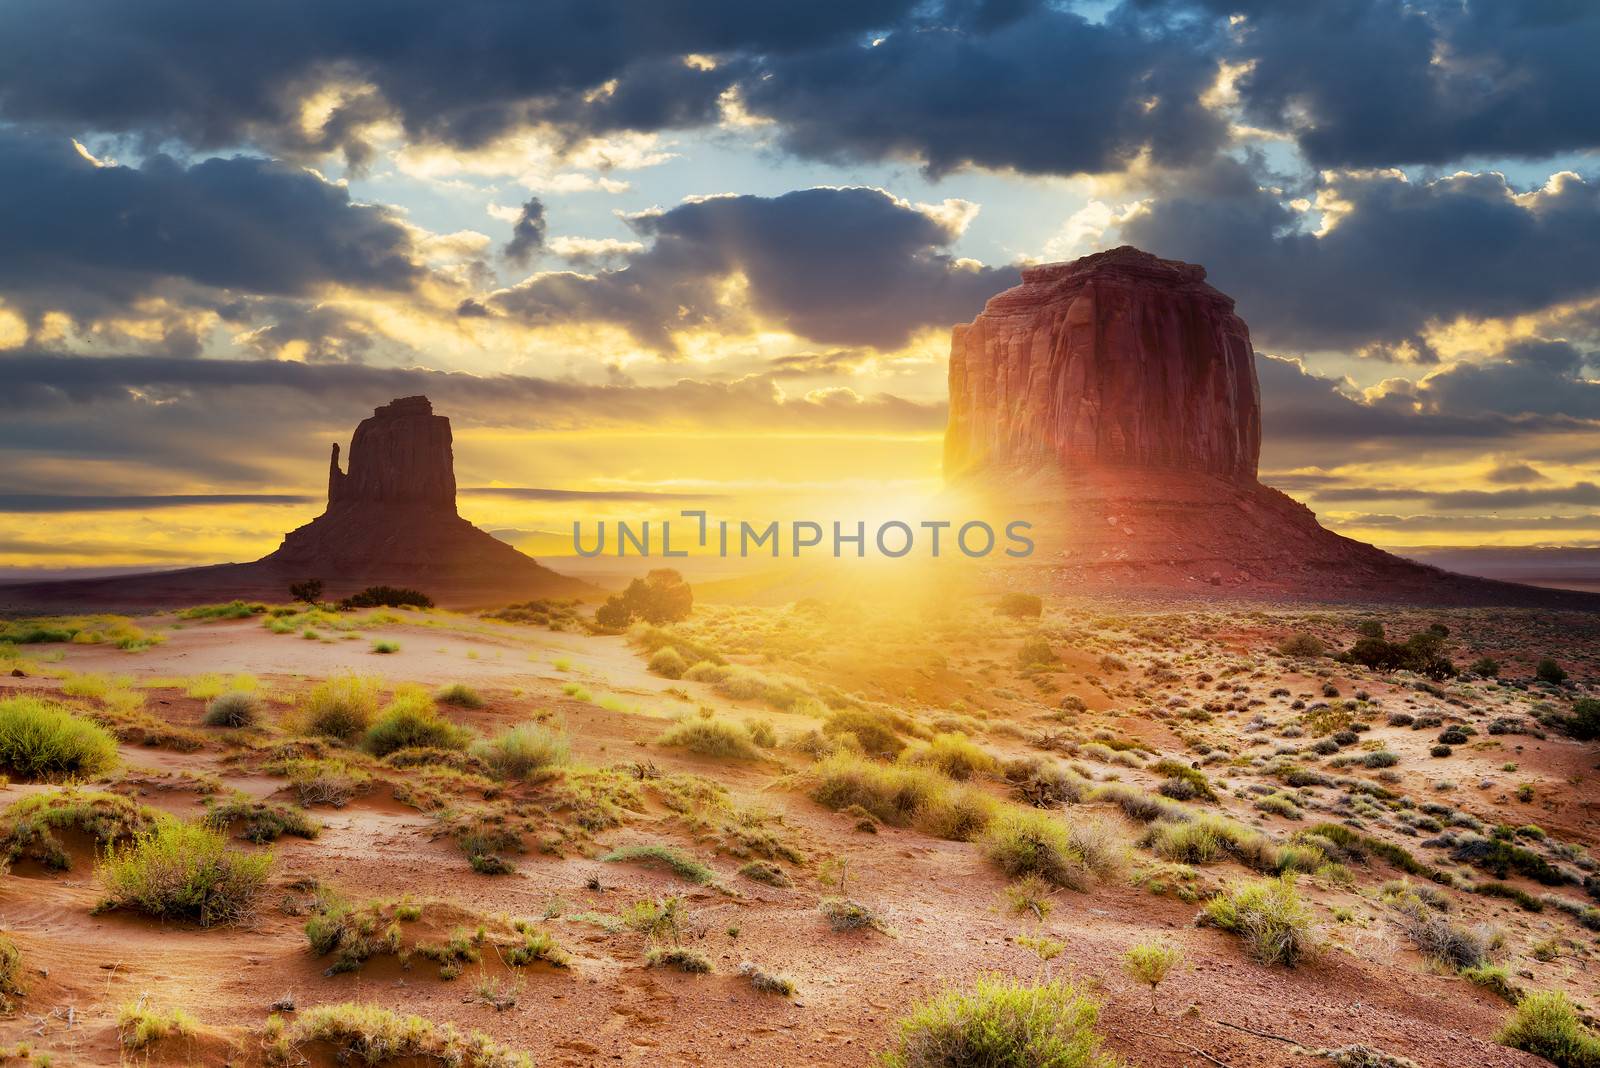 Sunset at the sisters in Monument Valley, USA